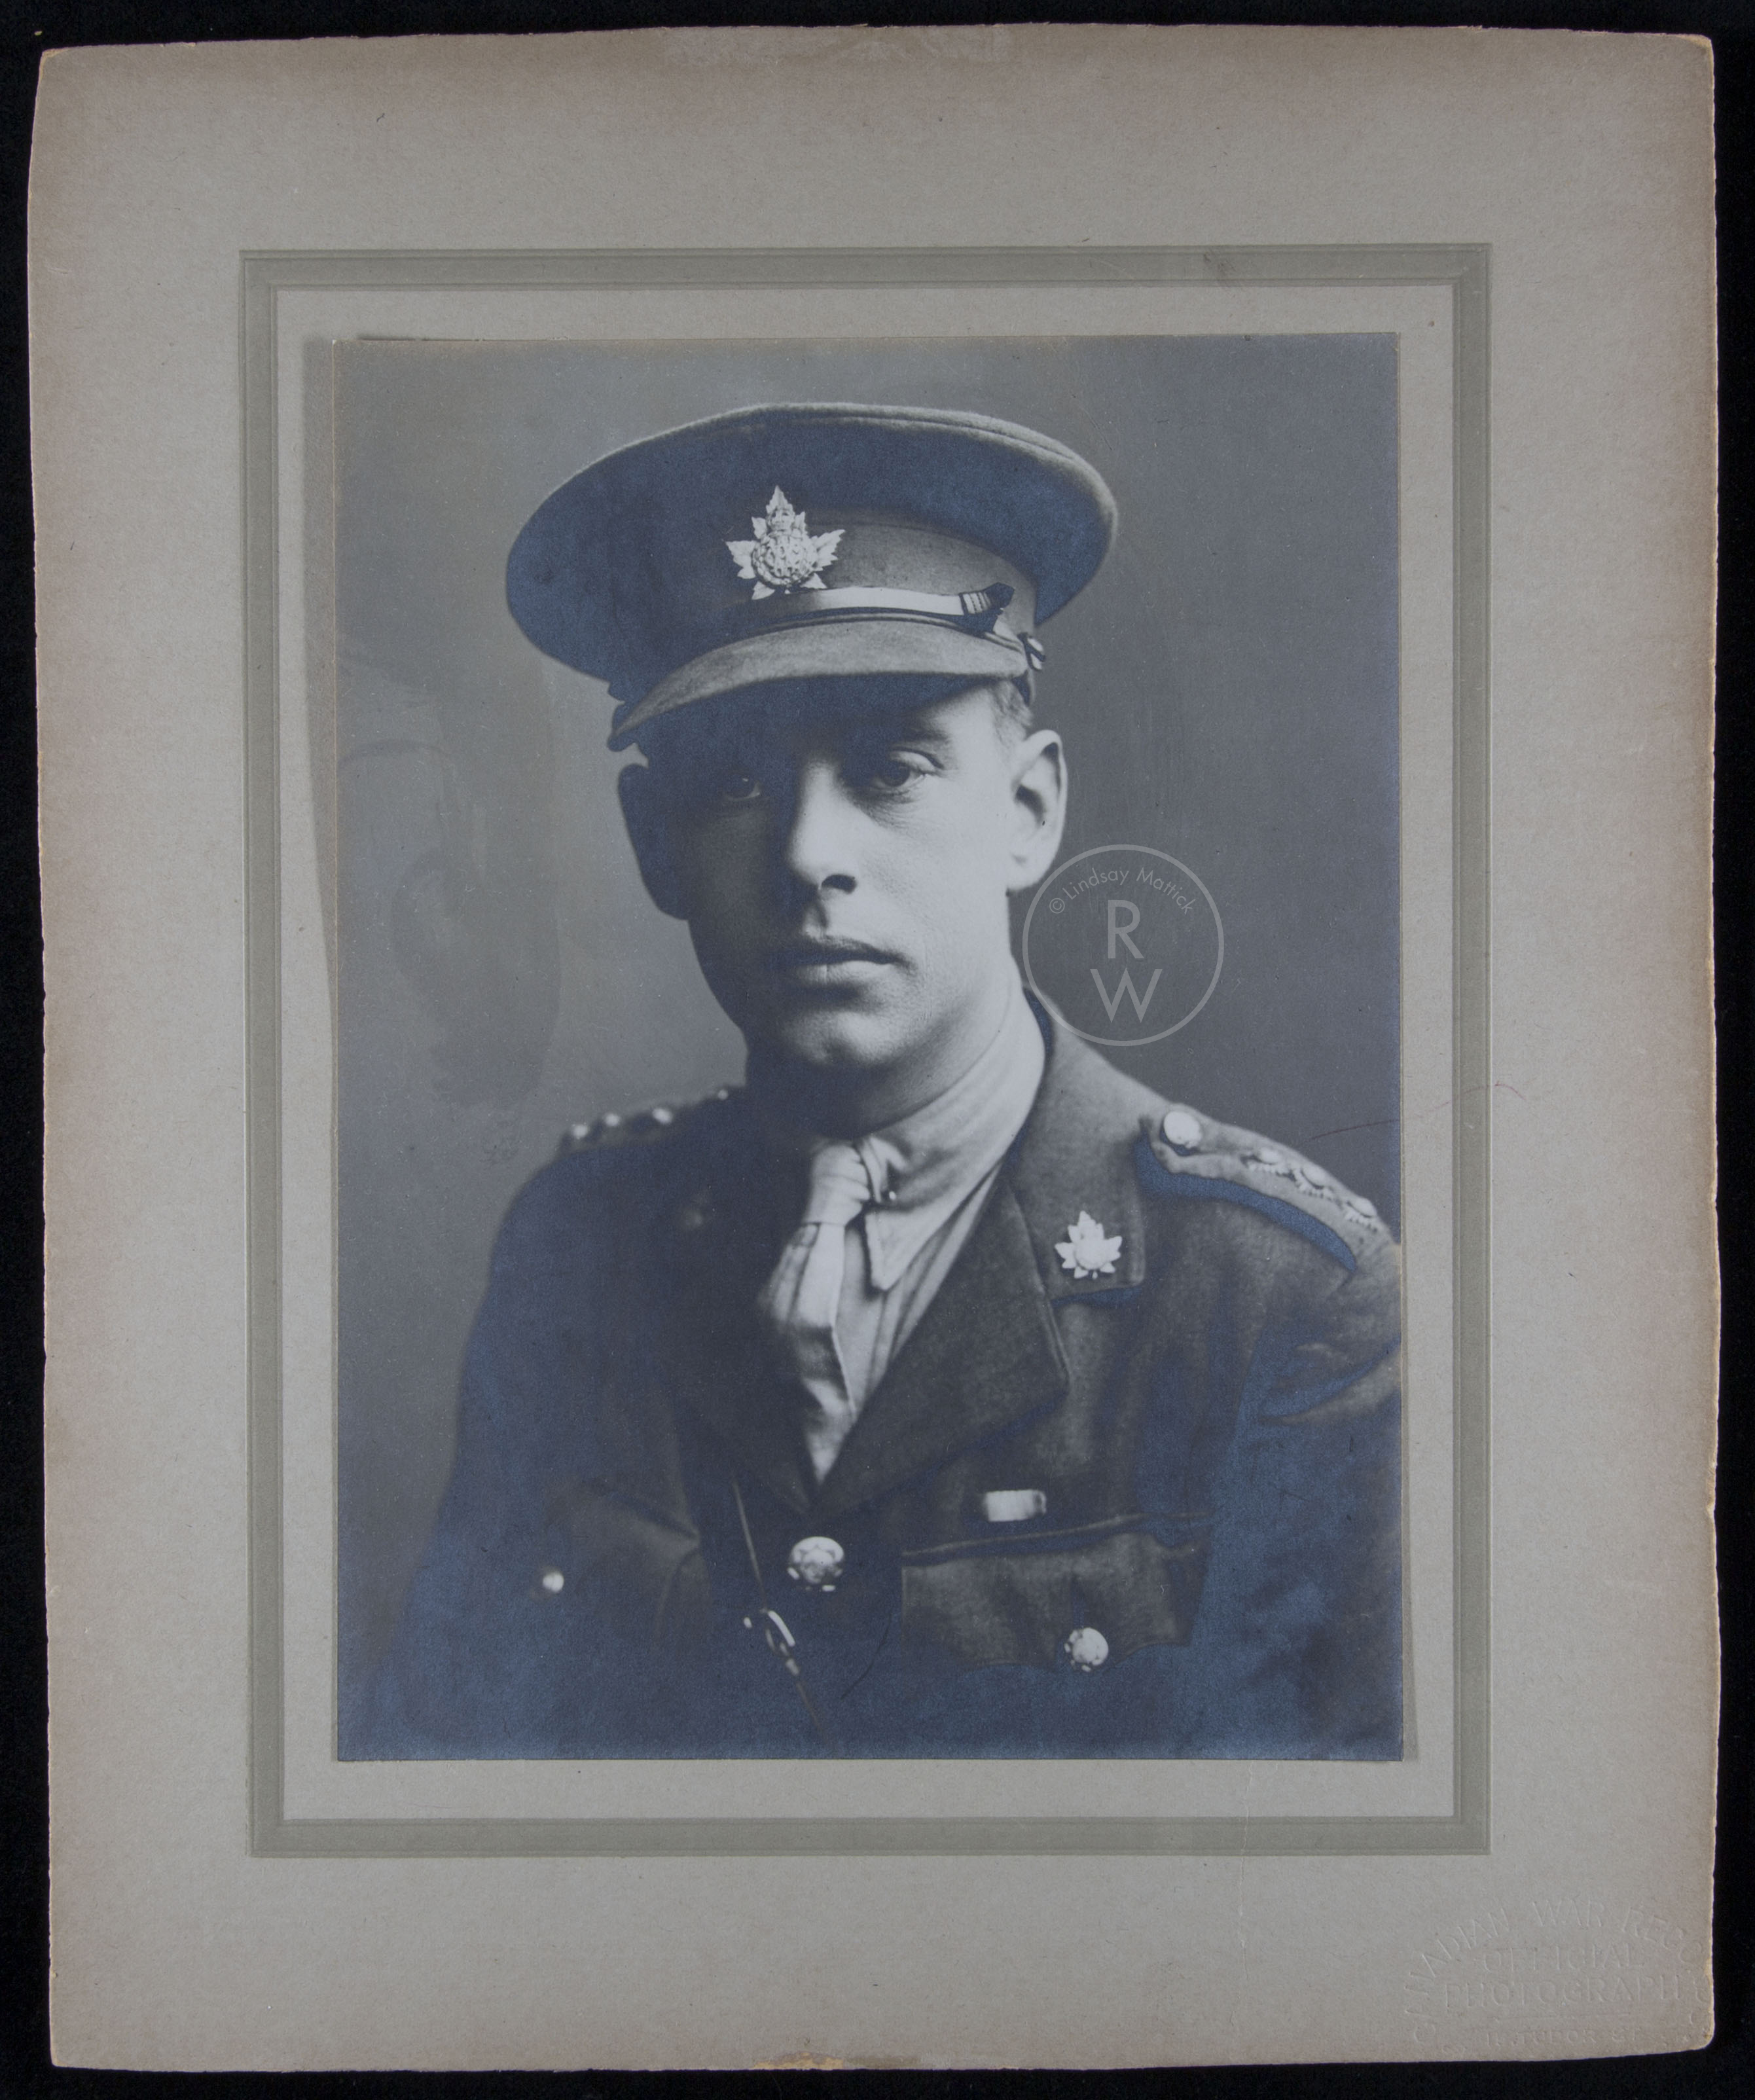 Portrait of Harry Colebourn as a soldier